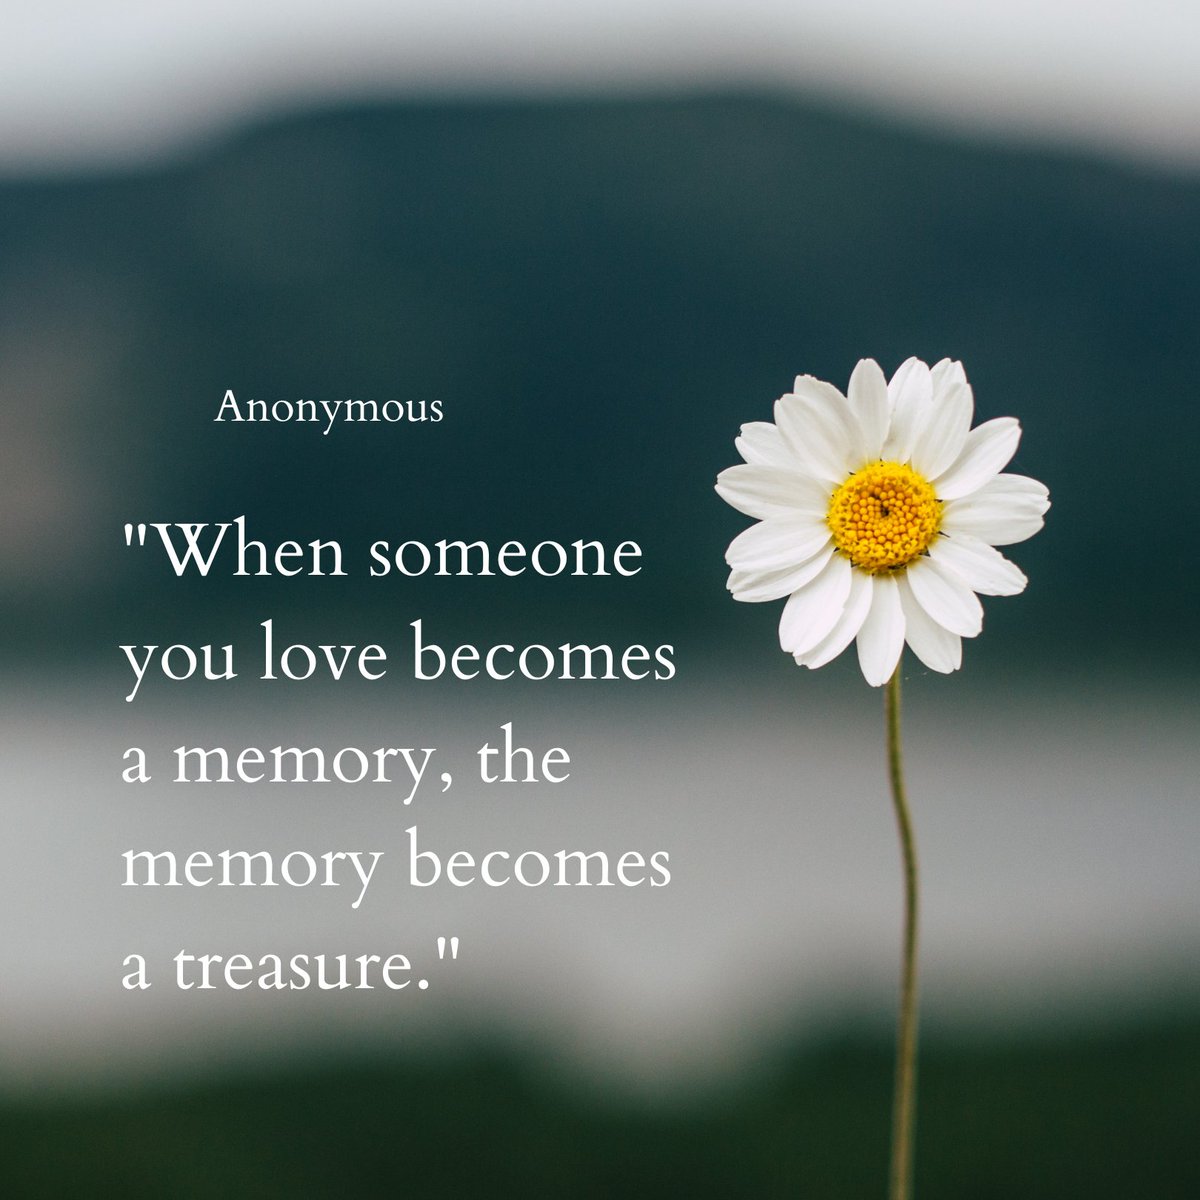 Grief is a journey that isn't always easy. Let's offer our support to those who are grieving. Discover ways to provide comfort and assistance through our resources at schoolcrisiscenter.org.

#SupportInGrief #CherishedMemories